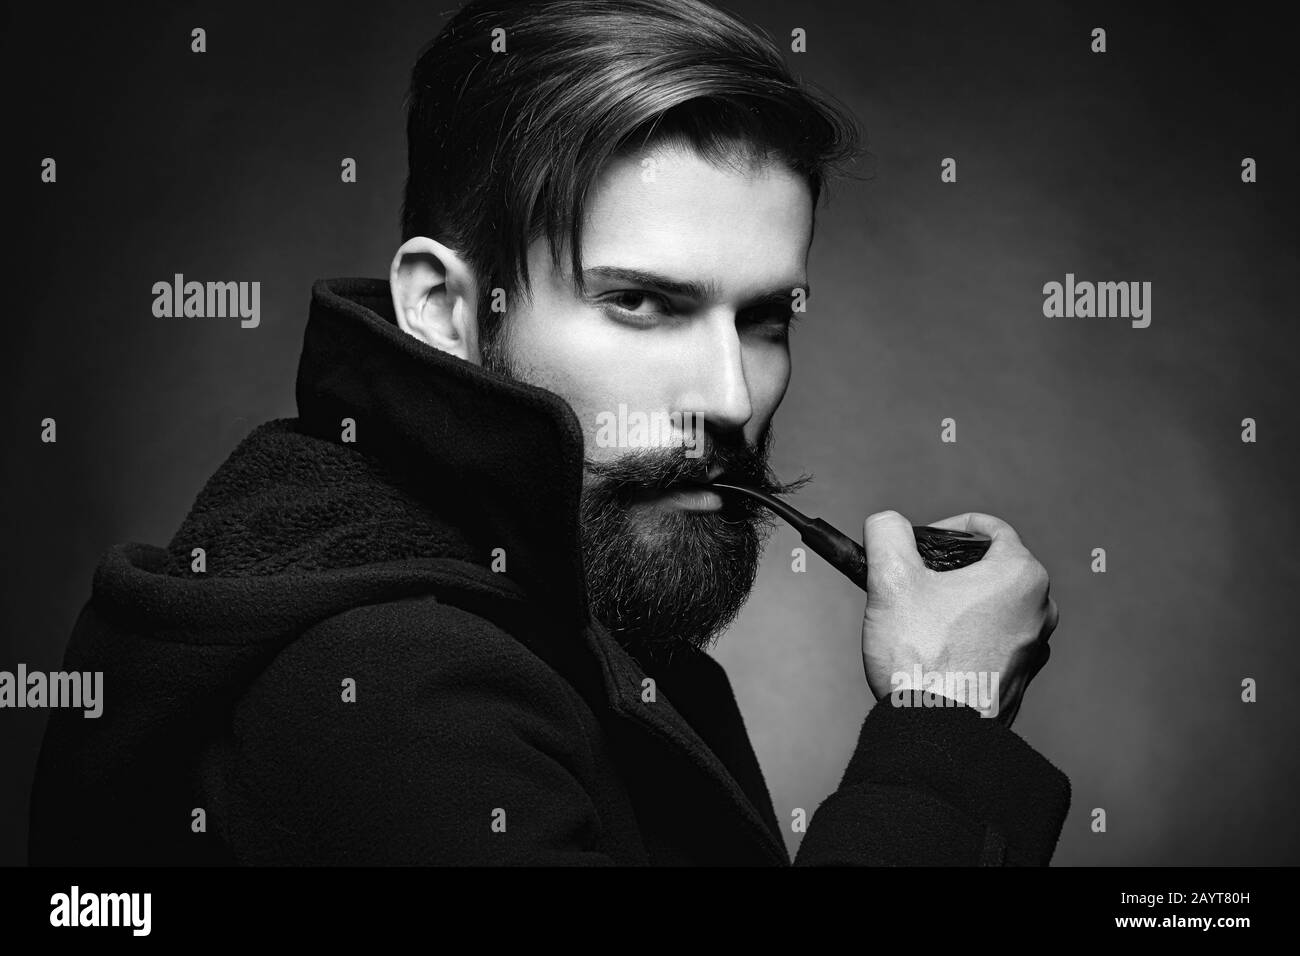 Brutal man with a beard and mustache Smoking a pipe. Close-up image of serious bearded man on dark background. Black and white photography Stock Photo